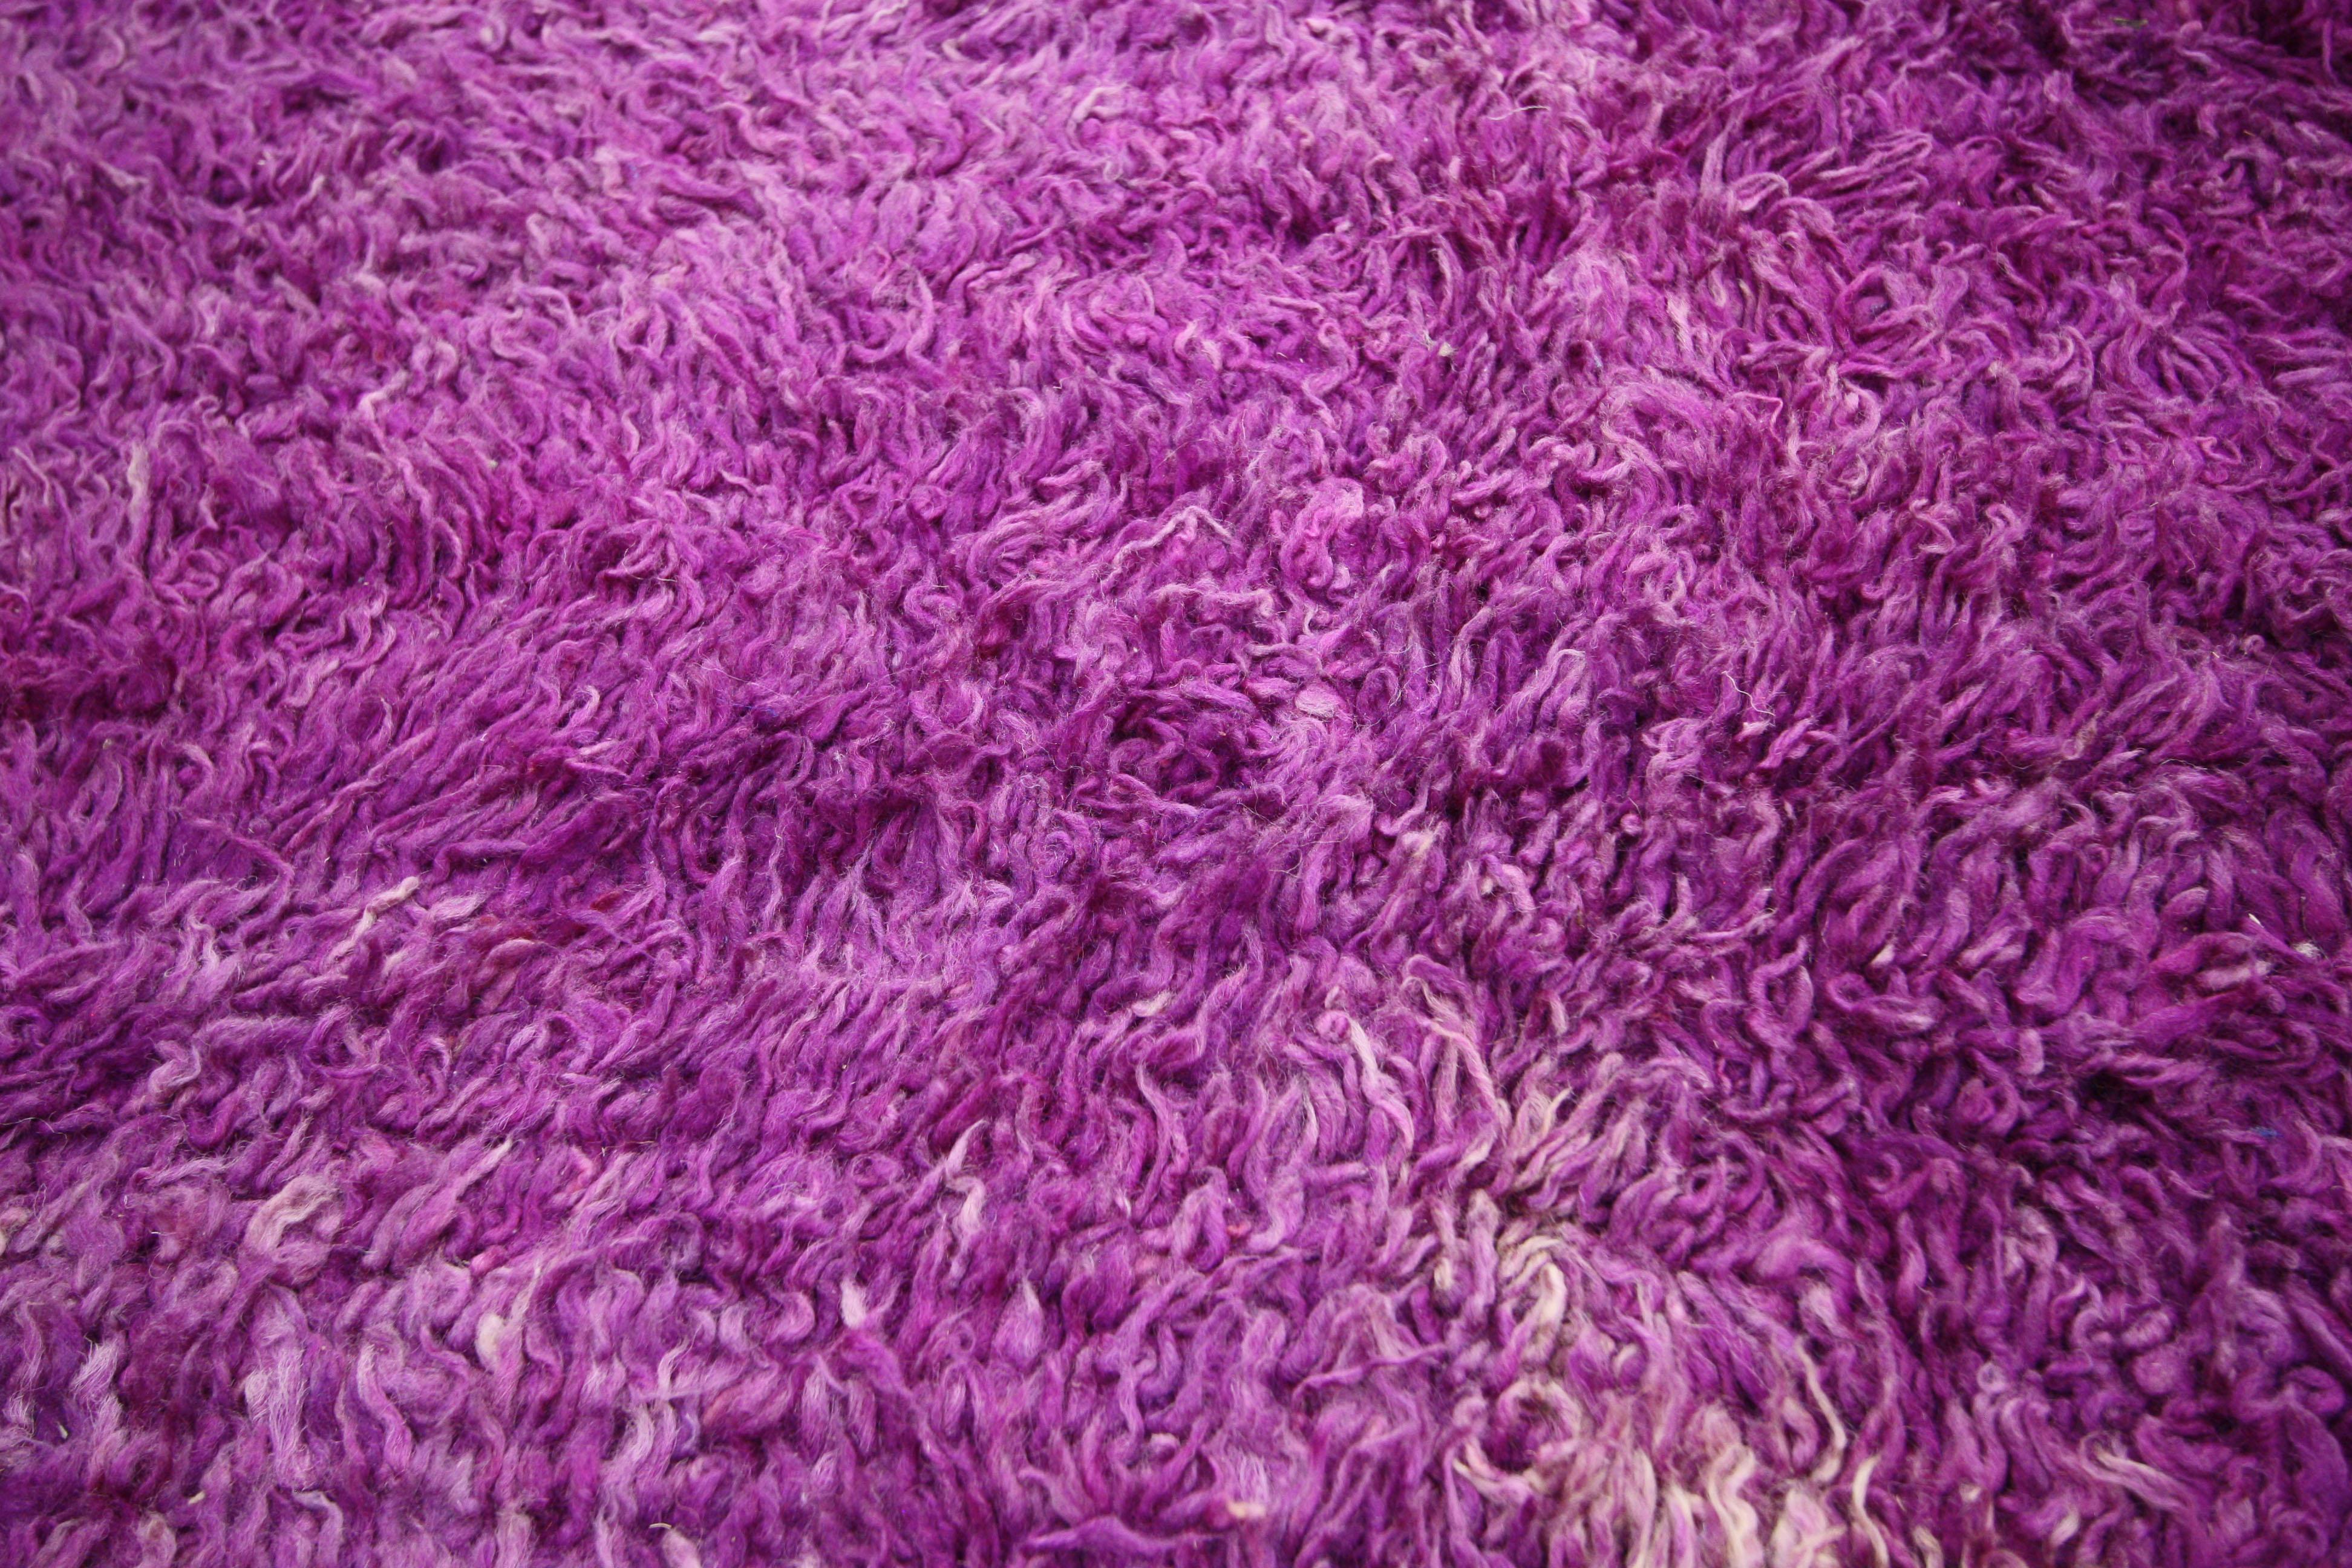 20669, Vintage Berber Purple Moroccan Rug with Post-Modern Memphis Style. This hand-knotted wool vintage Berber Moroccan rug features rich waves of purple abrash with a fashion-forward modern style. Side with color and texture in a modern interior